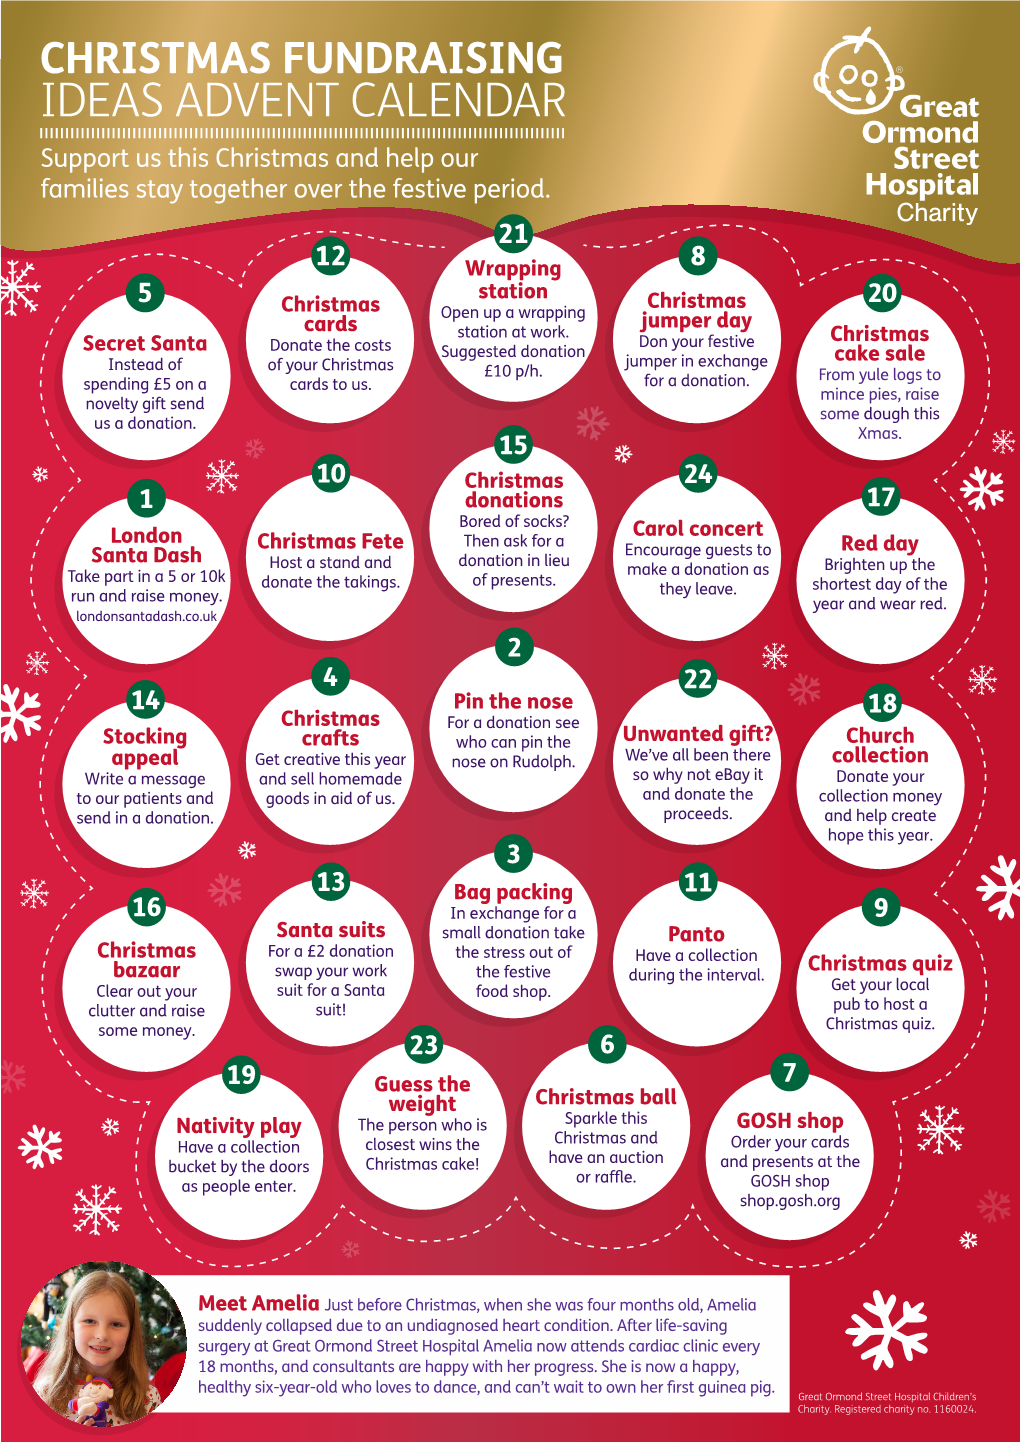 CHRISTMAS FUNDRAISING IDEAS ADVENT CALENDAR Support Us This Christmas and Help Our Families Stay Together Over the Festive Period